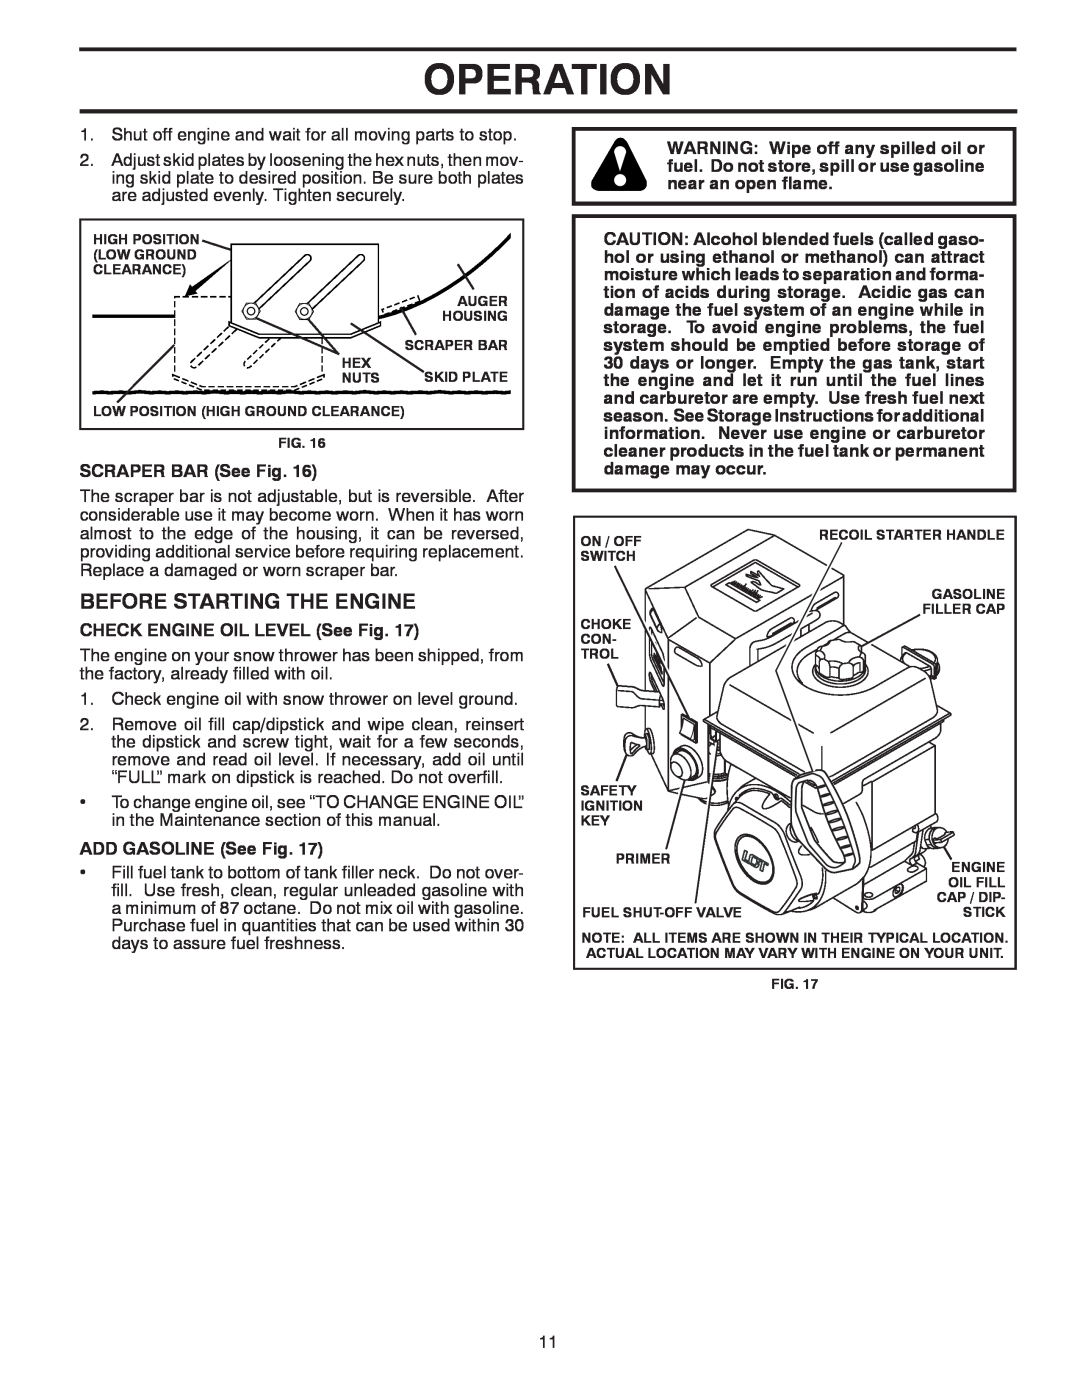 Poulan 421602 owner manual Before Starting The Engine, Operation, SCRAPER BAR See Fig, CHECK ENGINE OIL LEVEL See Fig 